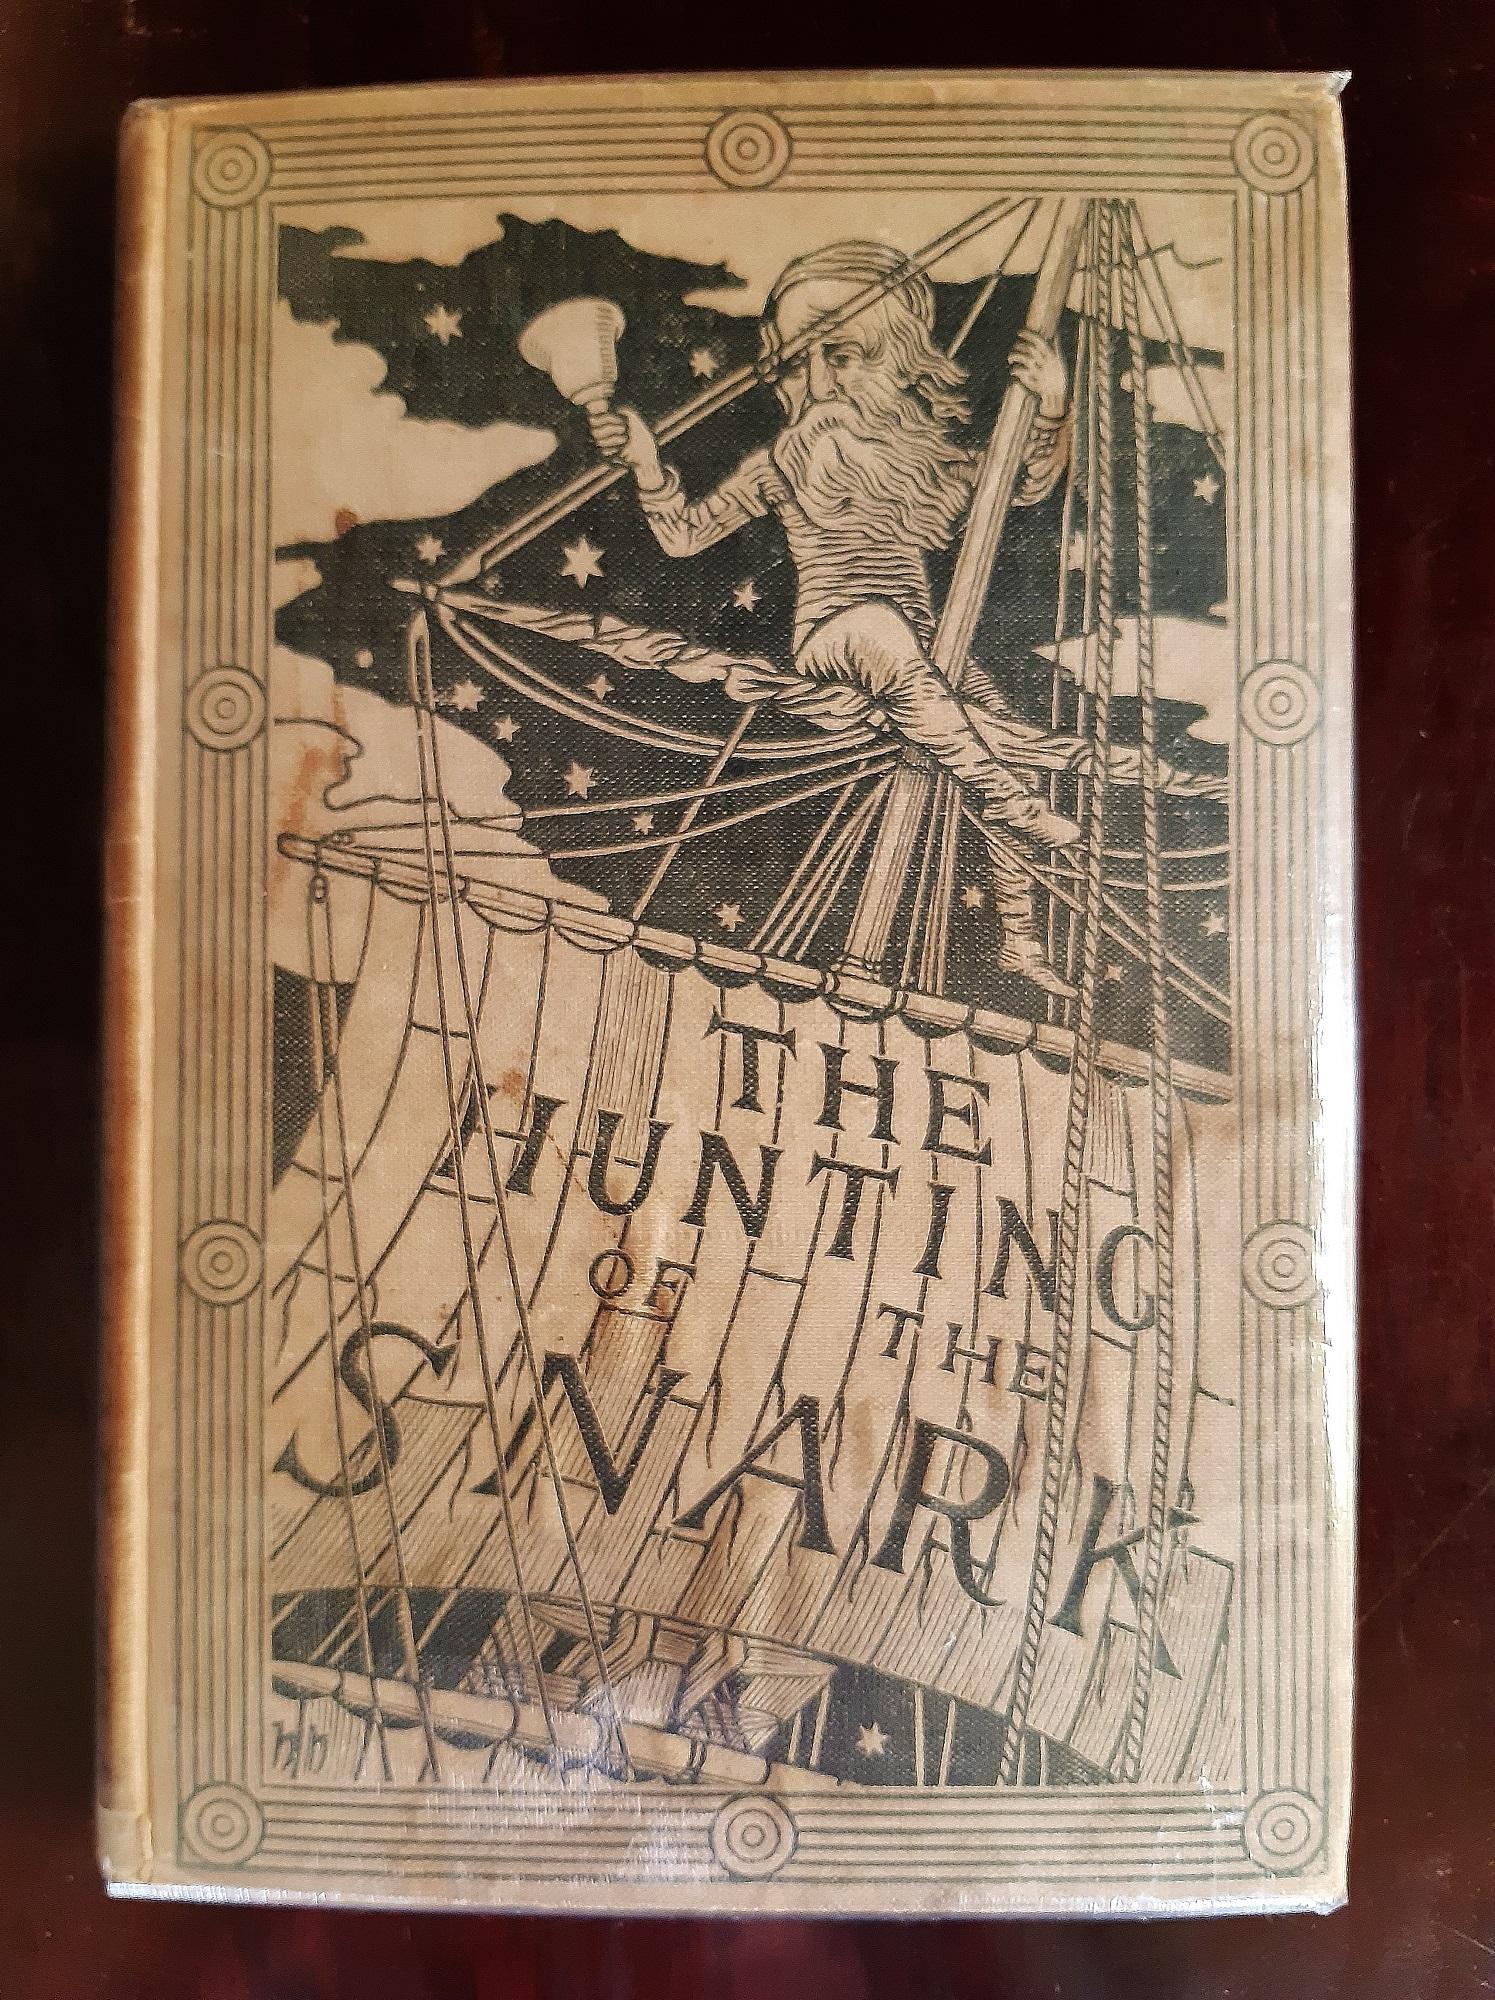 The hunting of the snark is an original modern rare book written by Lewis Carroll (Daresbury, 1832 - Guiford, 1898) in 1876 and illustrated by Henry Holiday.

Original First Edition.

Published by McMillan, London.

Format: in 8°. The dimensions and